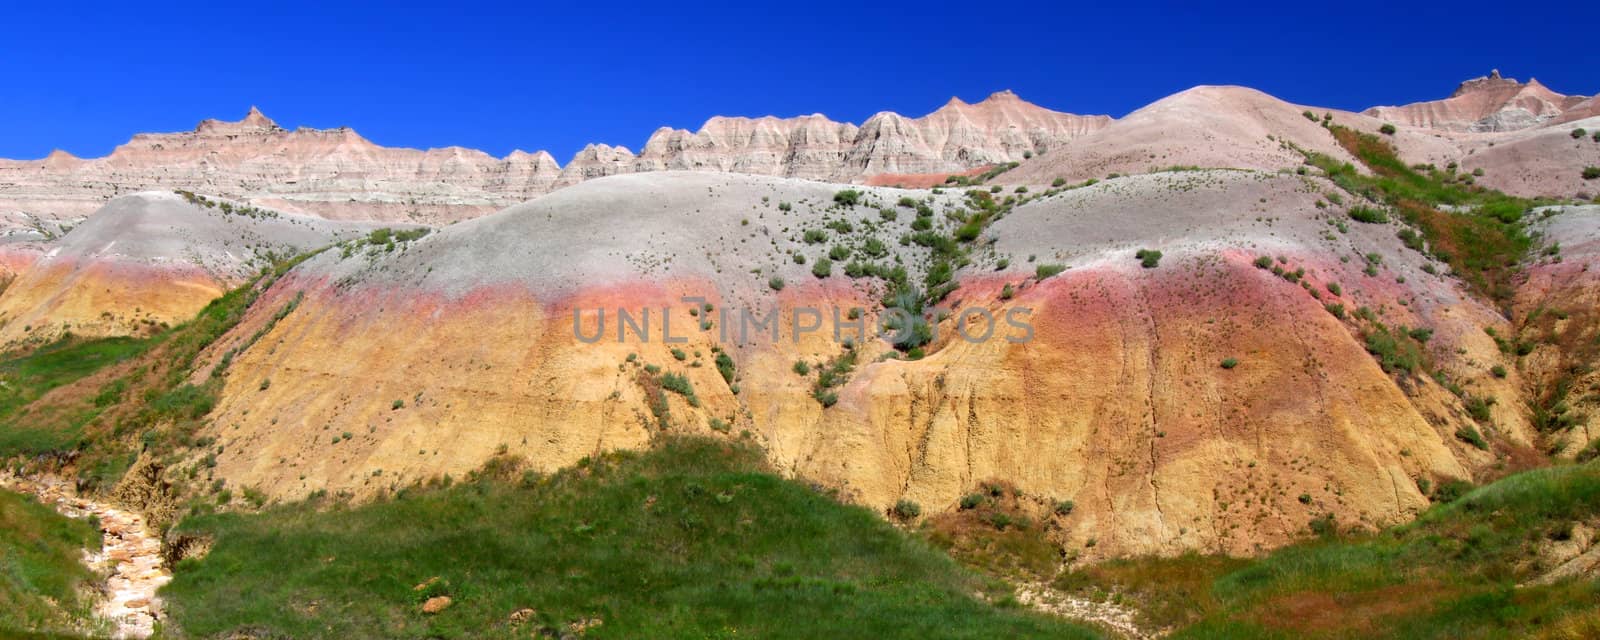 Beautiful mountains in the Badlands National Park in South Dakota.